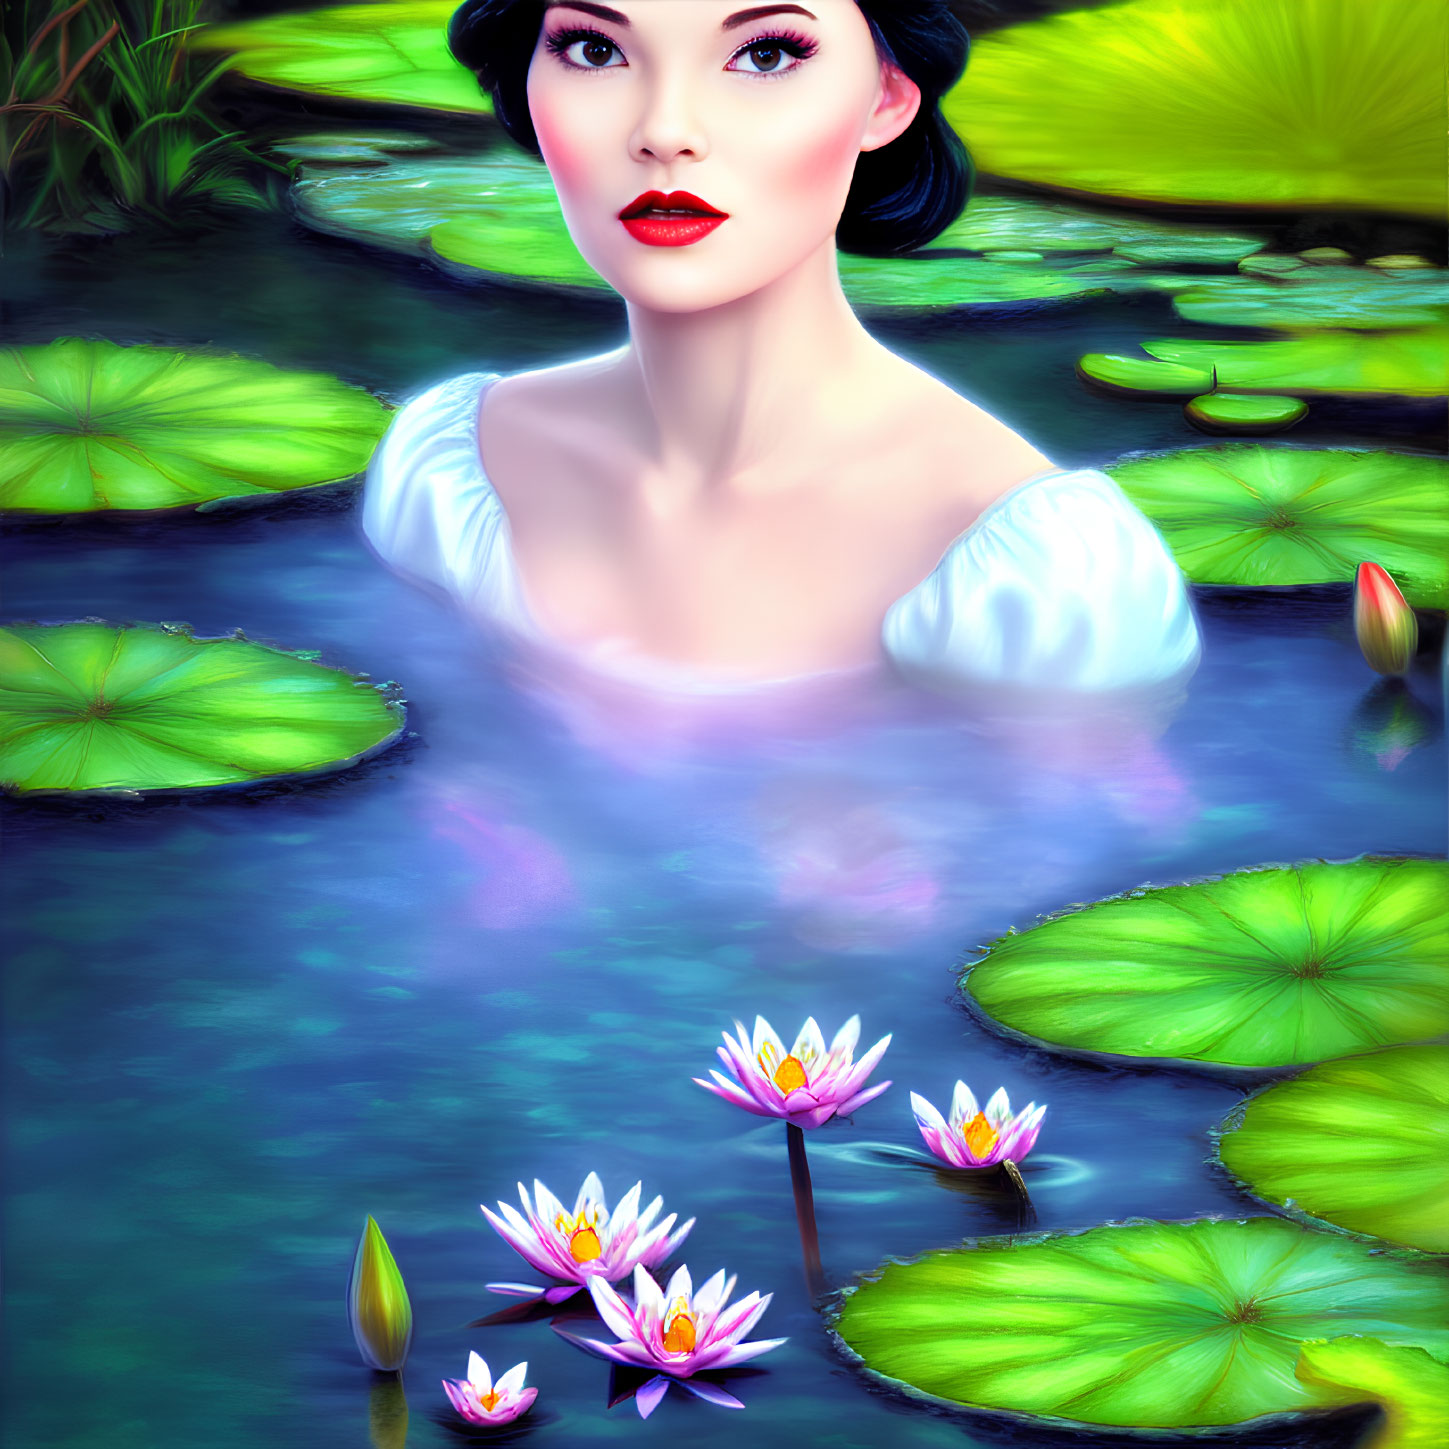 Dark-haired woman in blue pond with water lilies and green lily pads